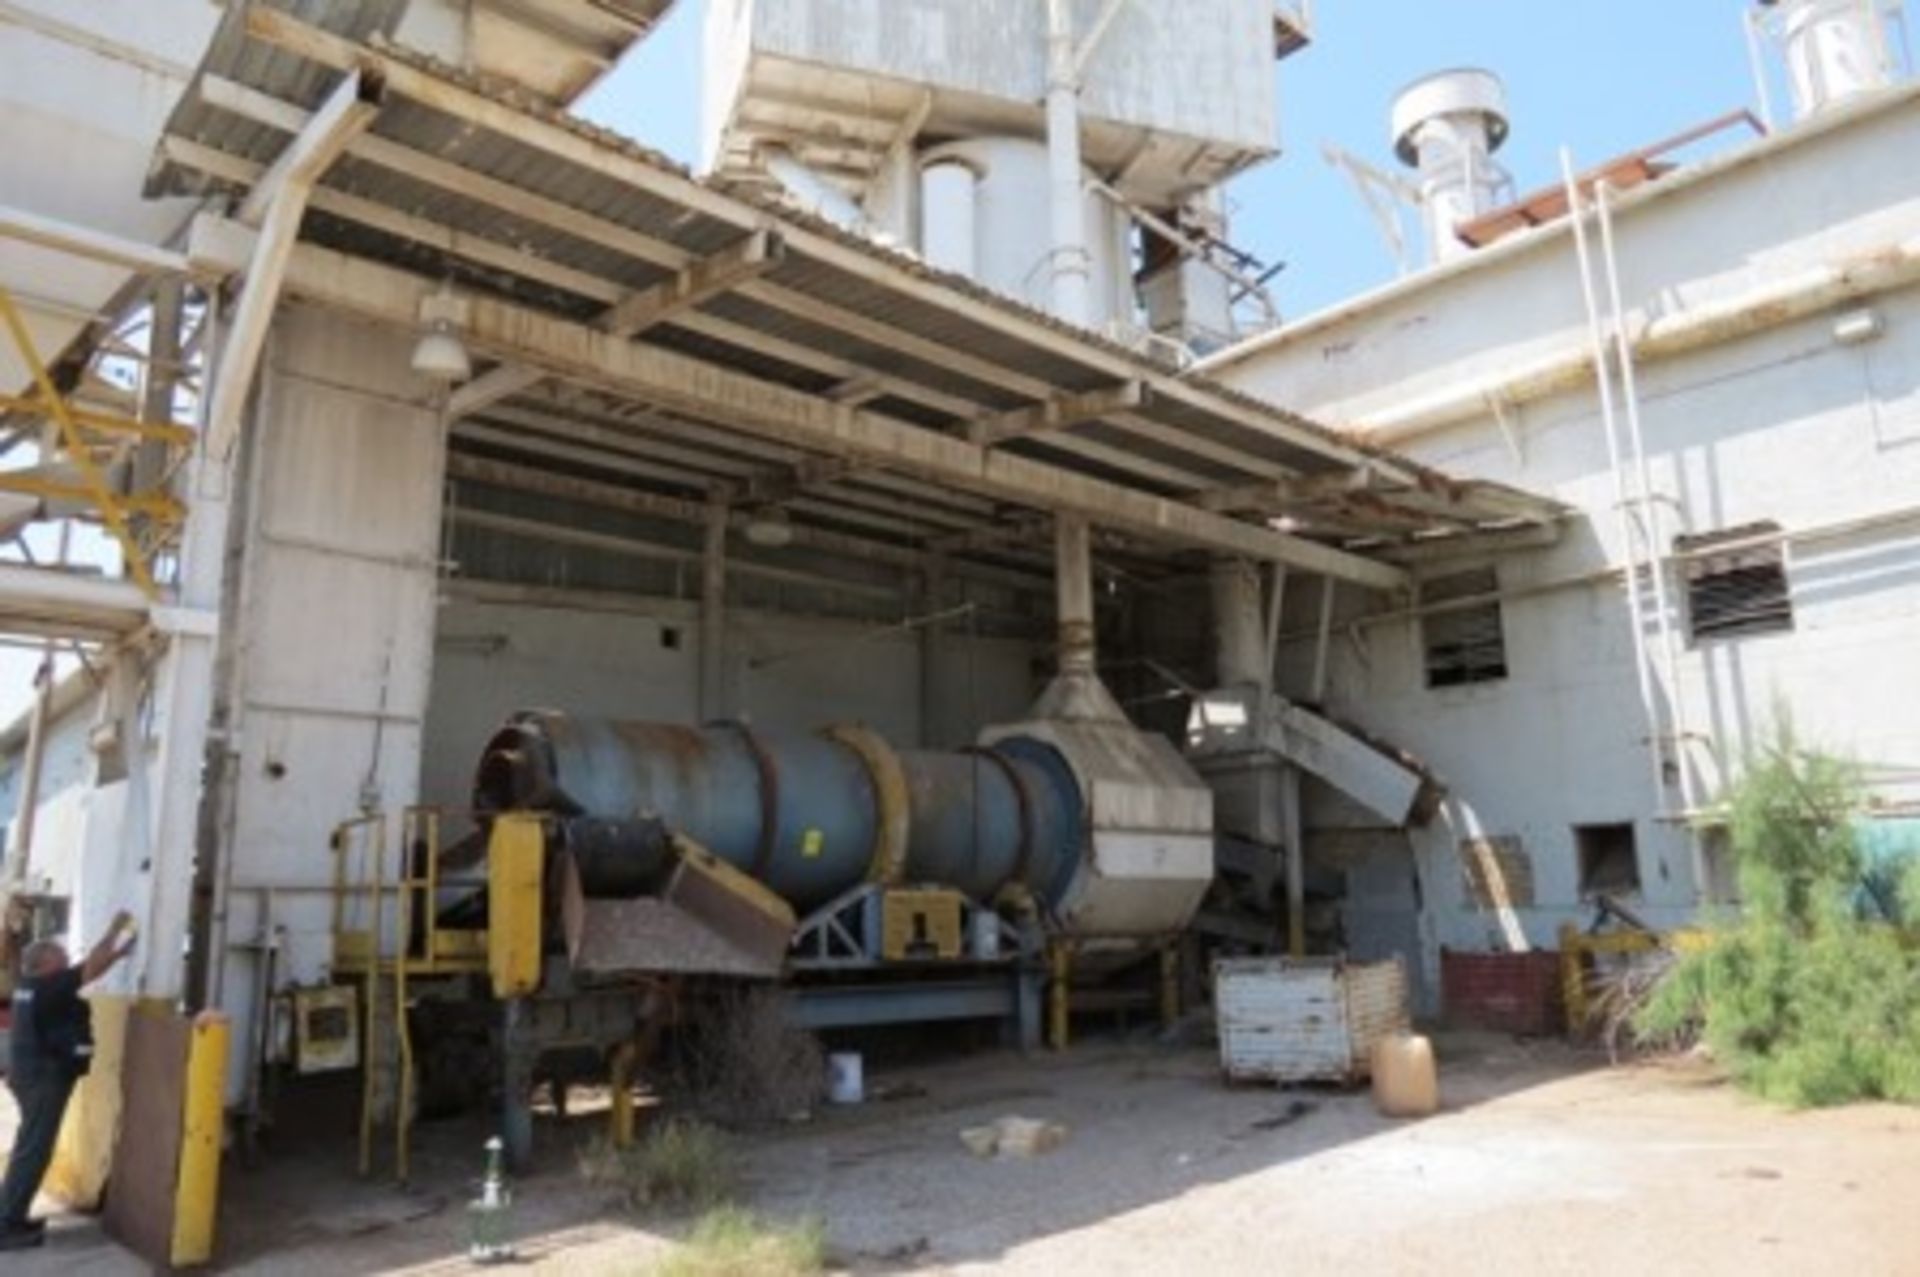 Dust collector, with 2 150 hp centrifugal blowers, filters, ducts, cooling tower - Image 34 of 46